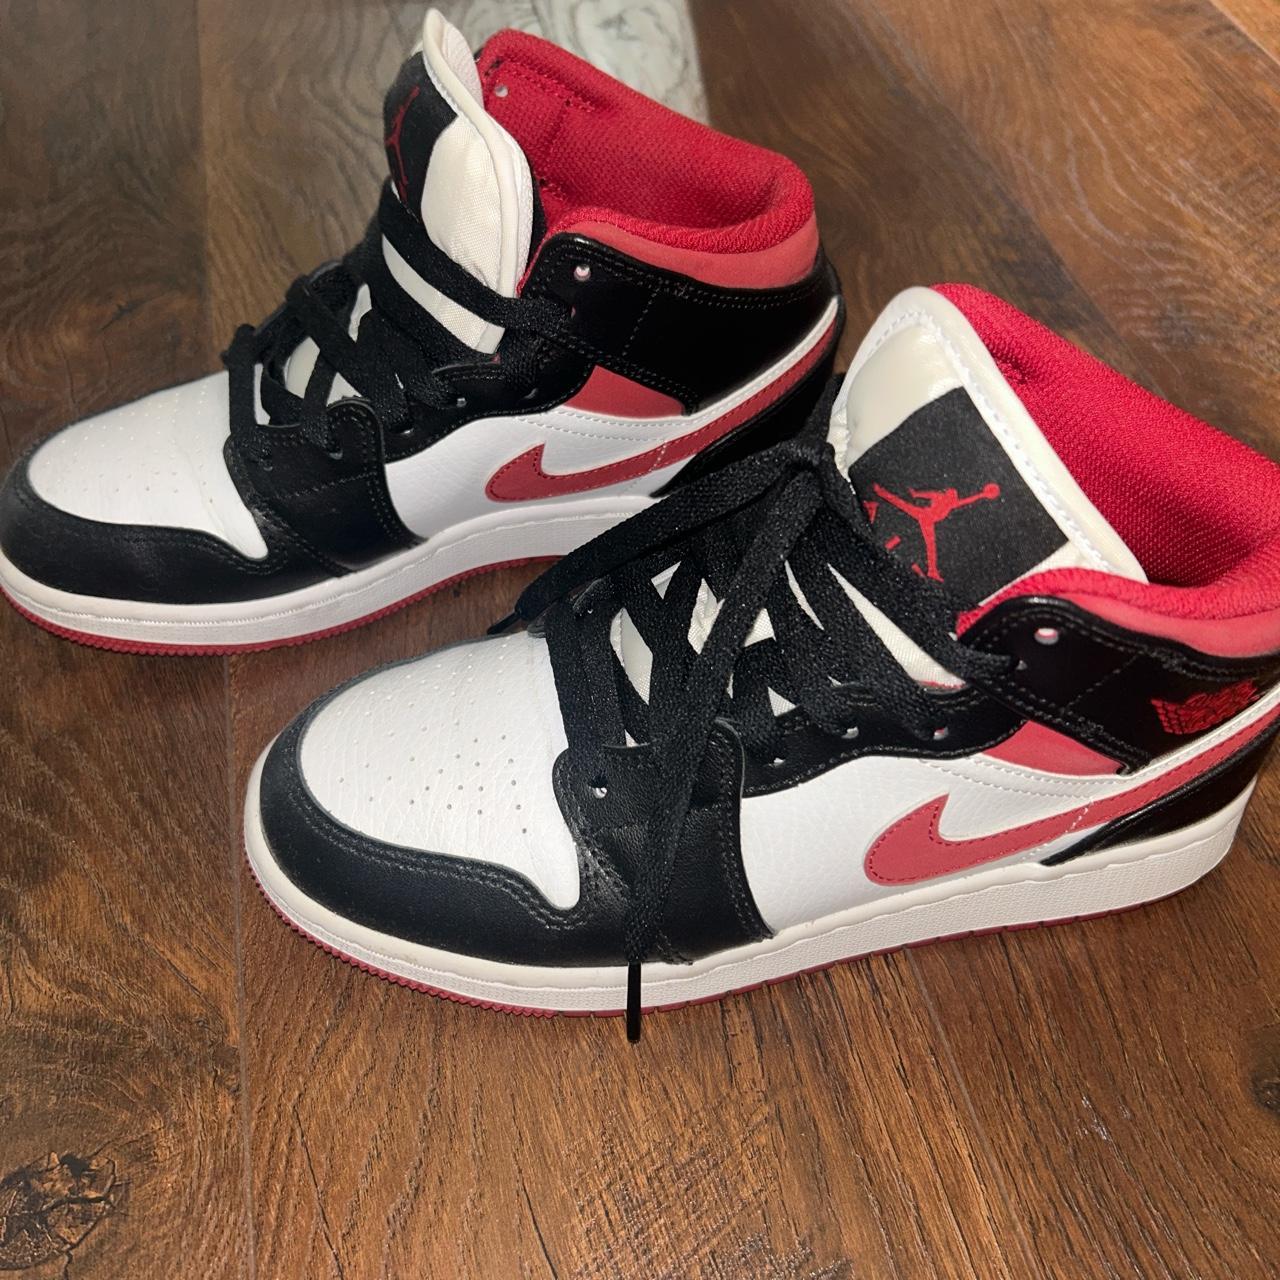 Red, Black, and White Jordan 1s I’m moving soon and... - Depop